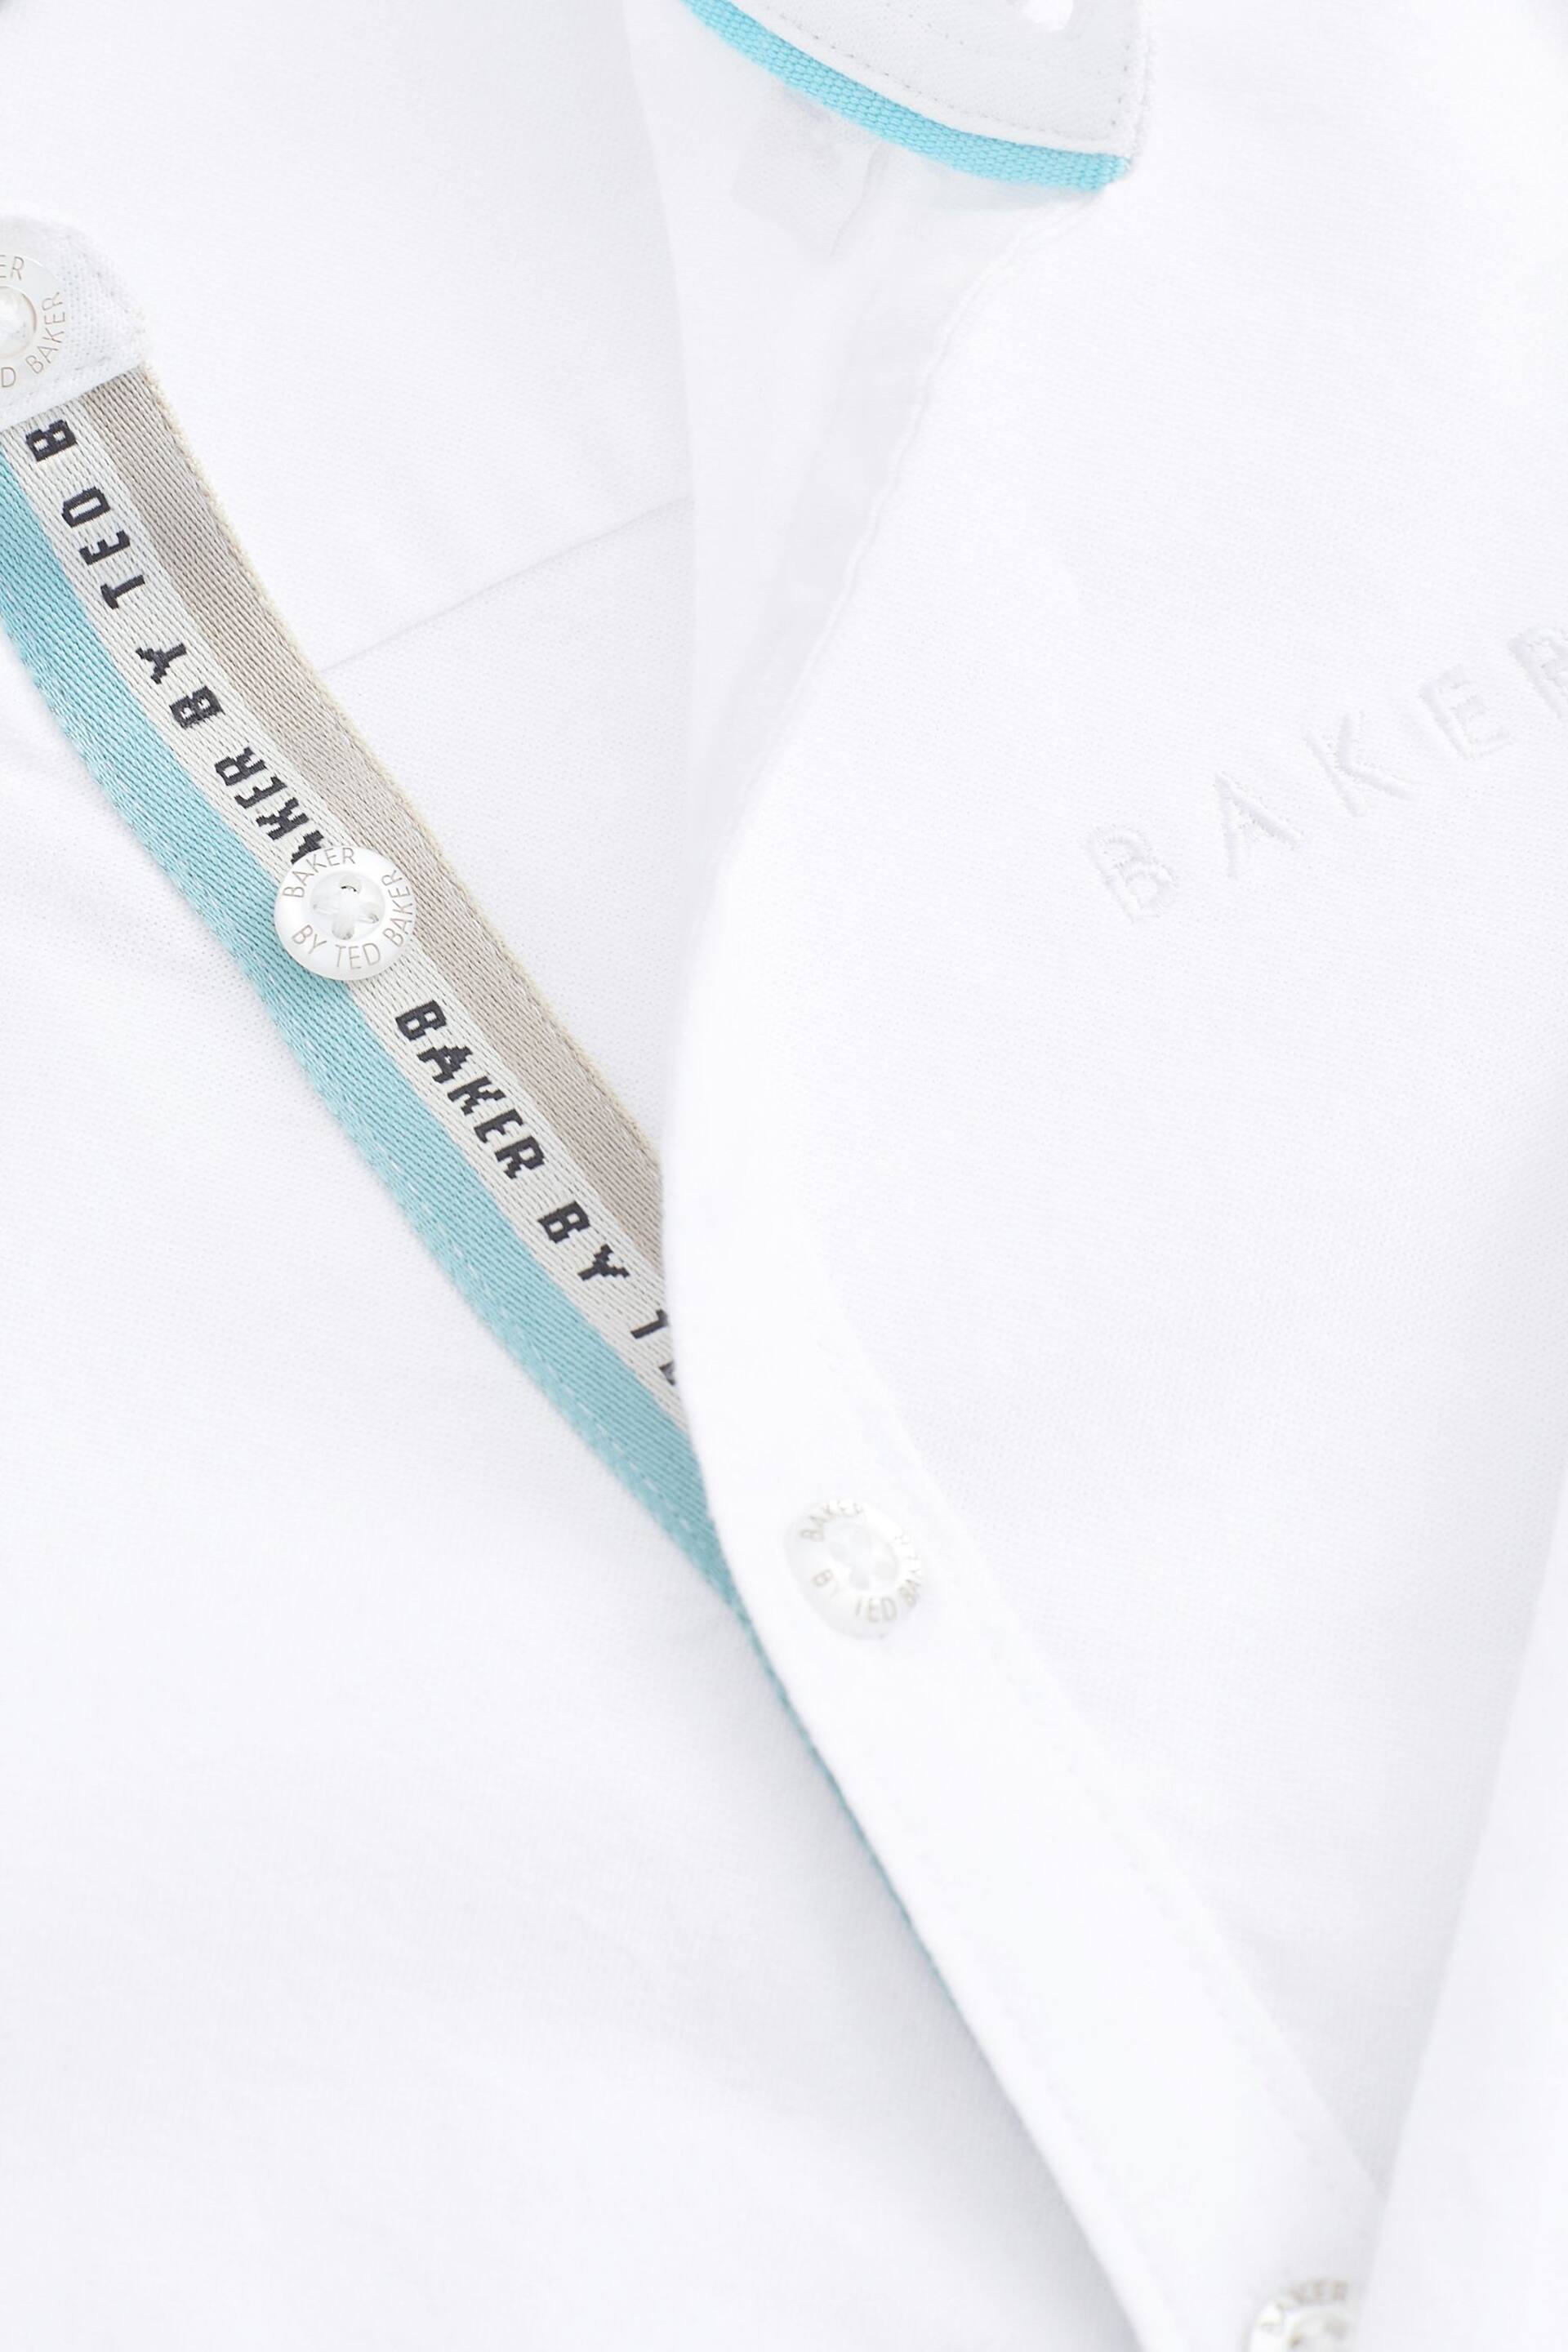 Baker by Ted Baker Oxford Shirt - Image 7 of 7